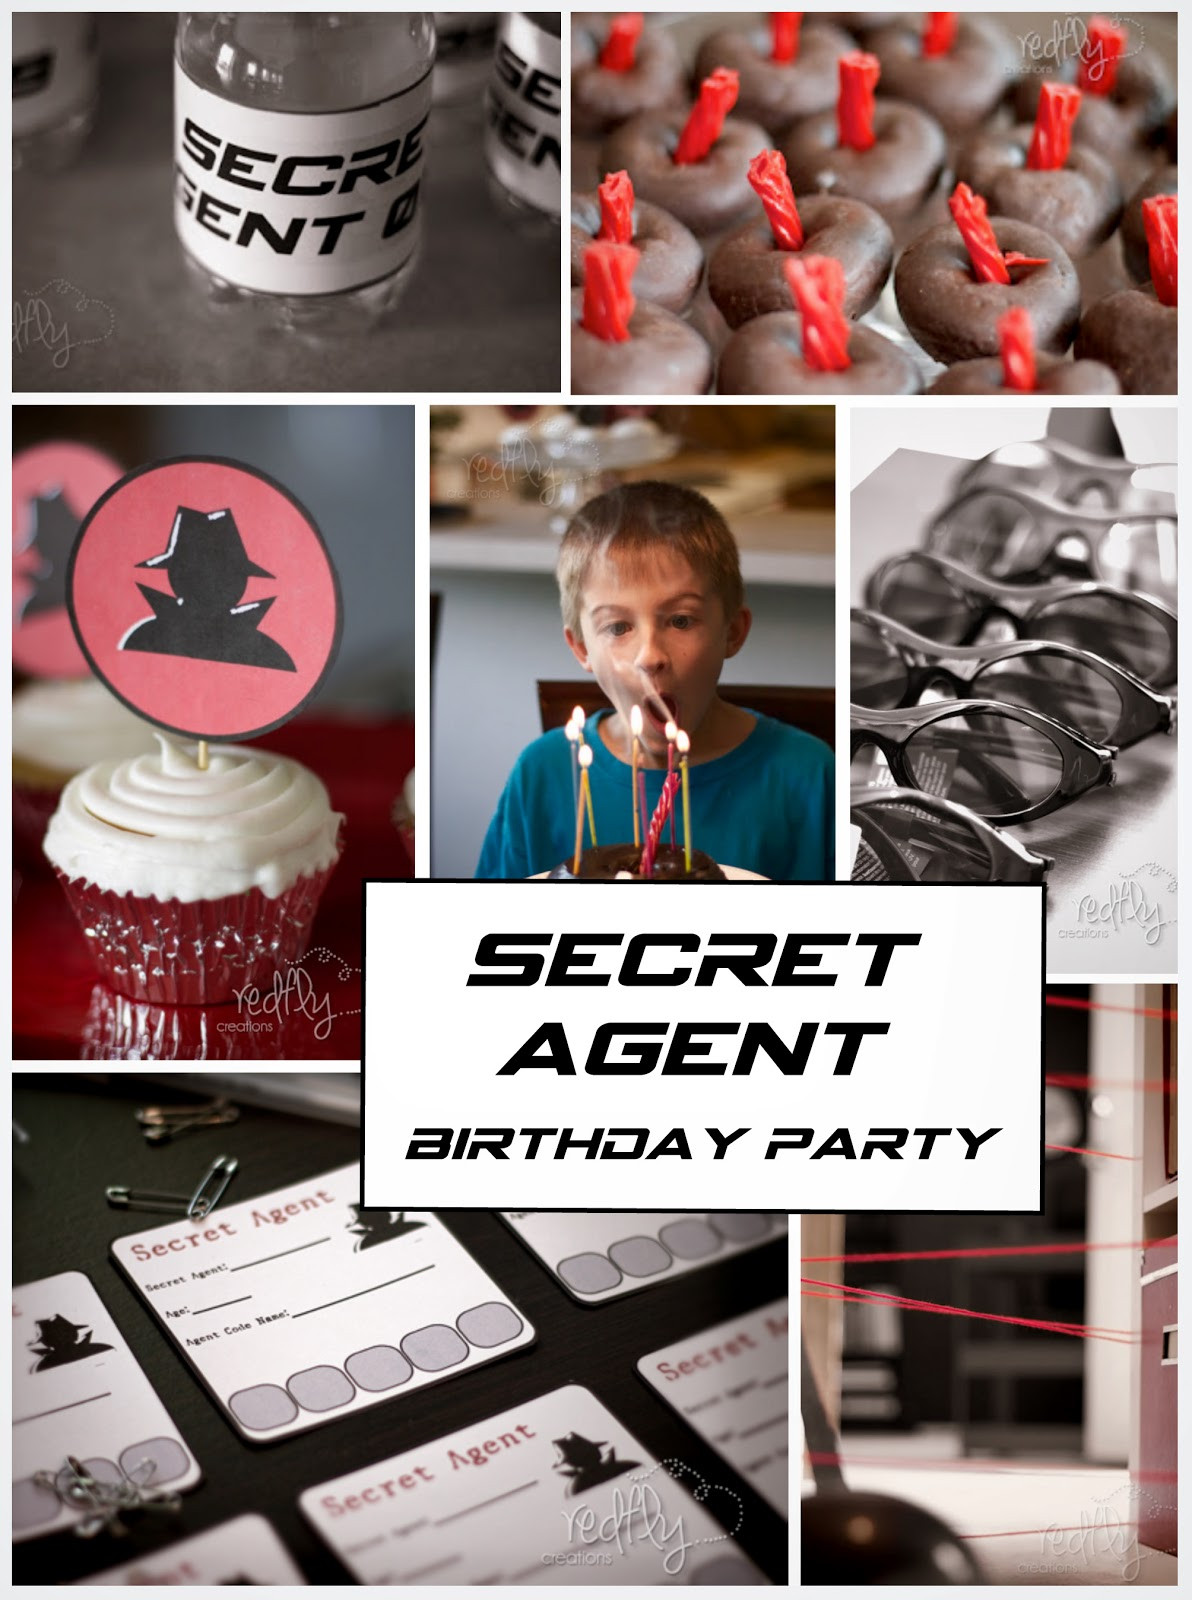 Secret Agent Birthday Party
 Redfly Creations Secret Agent Birthday Party Free